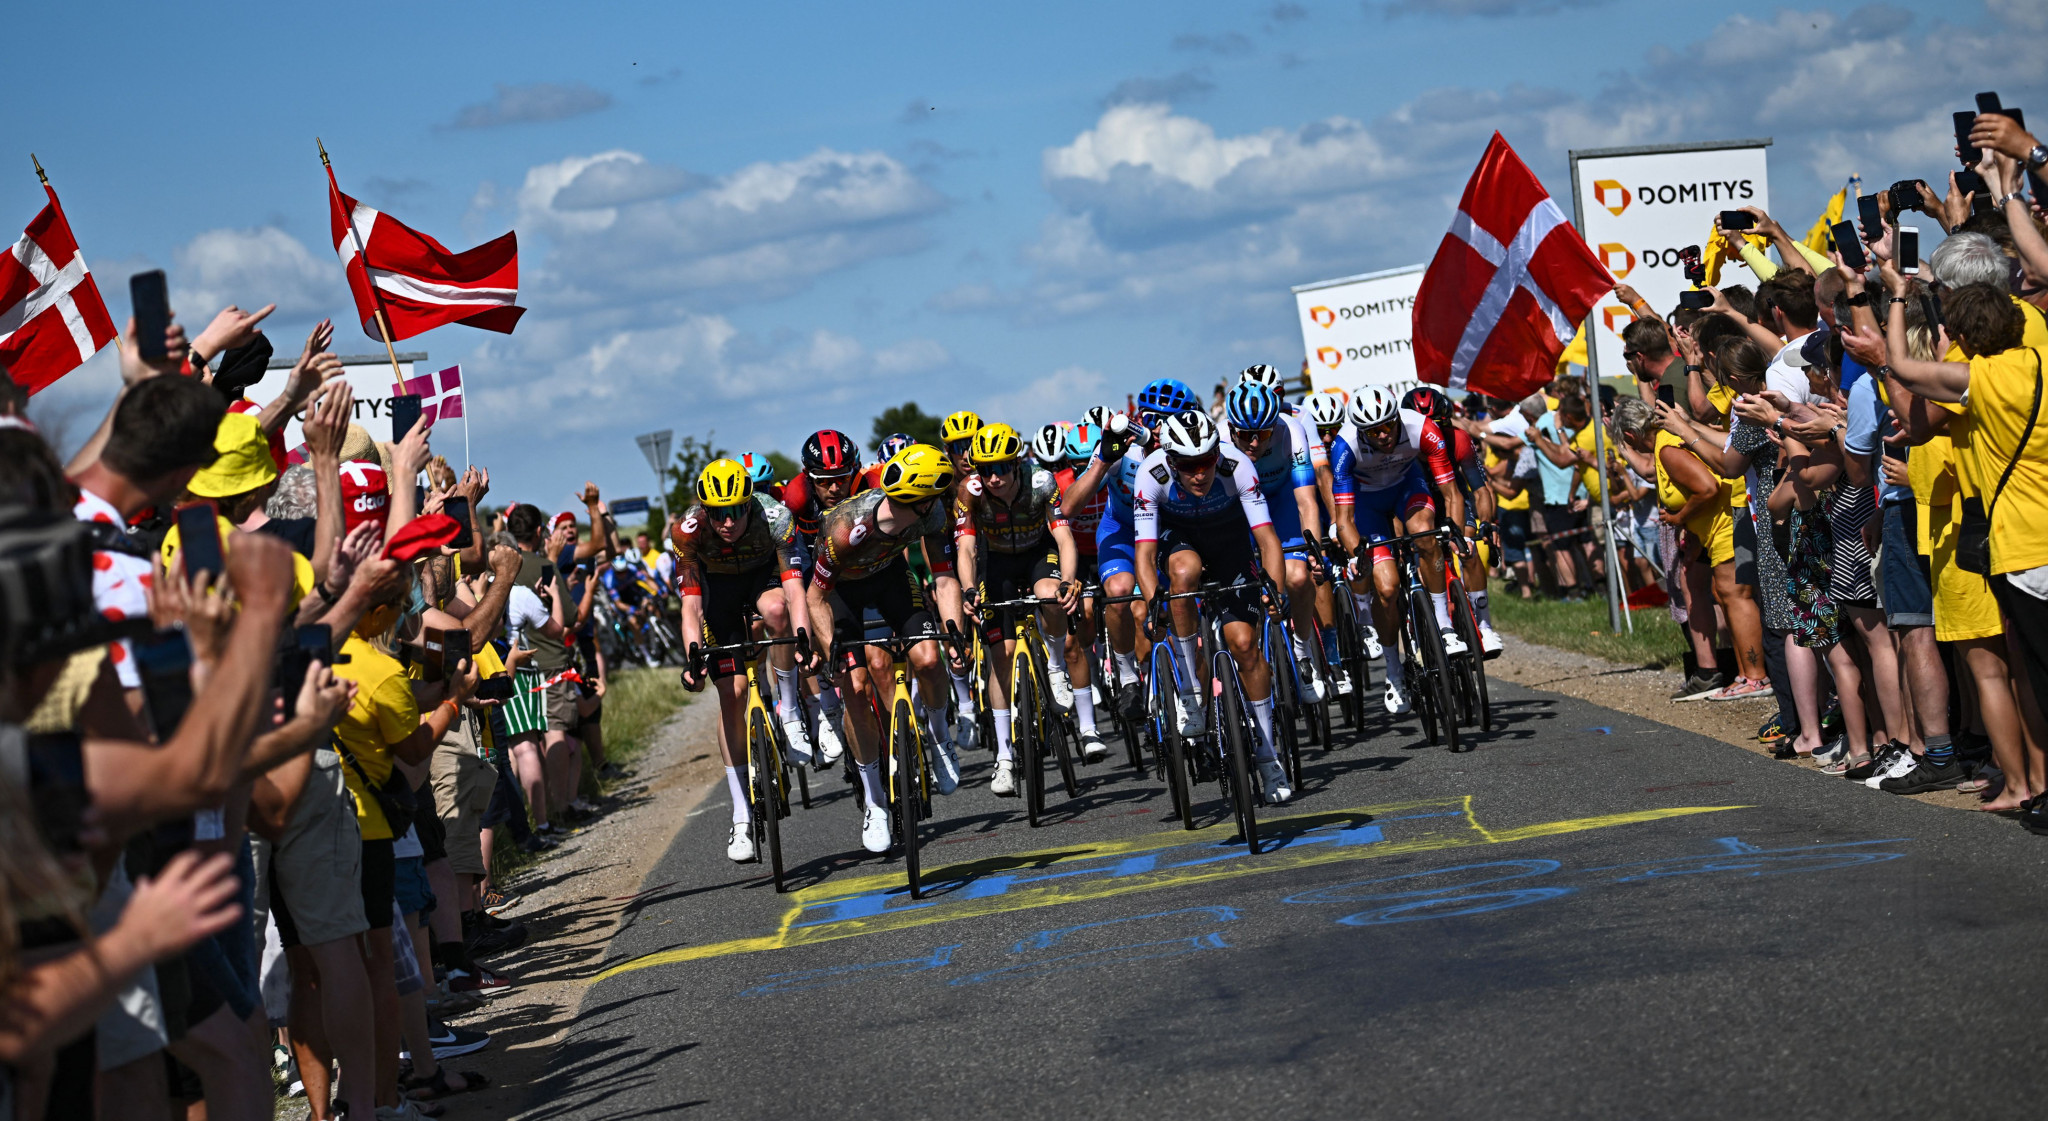 Denmark has a special passion for cycling. GETTY IMAGES